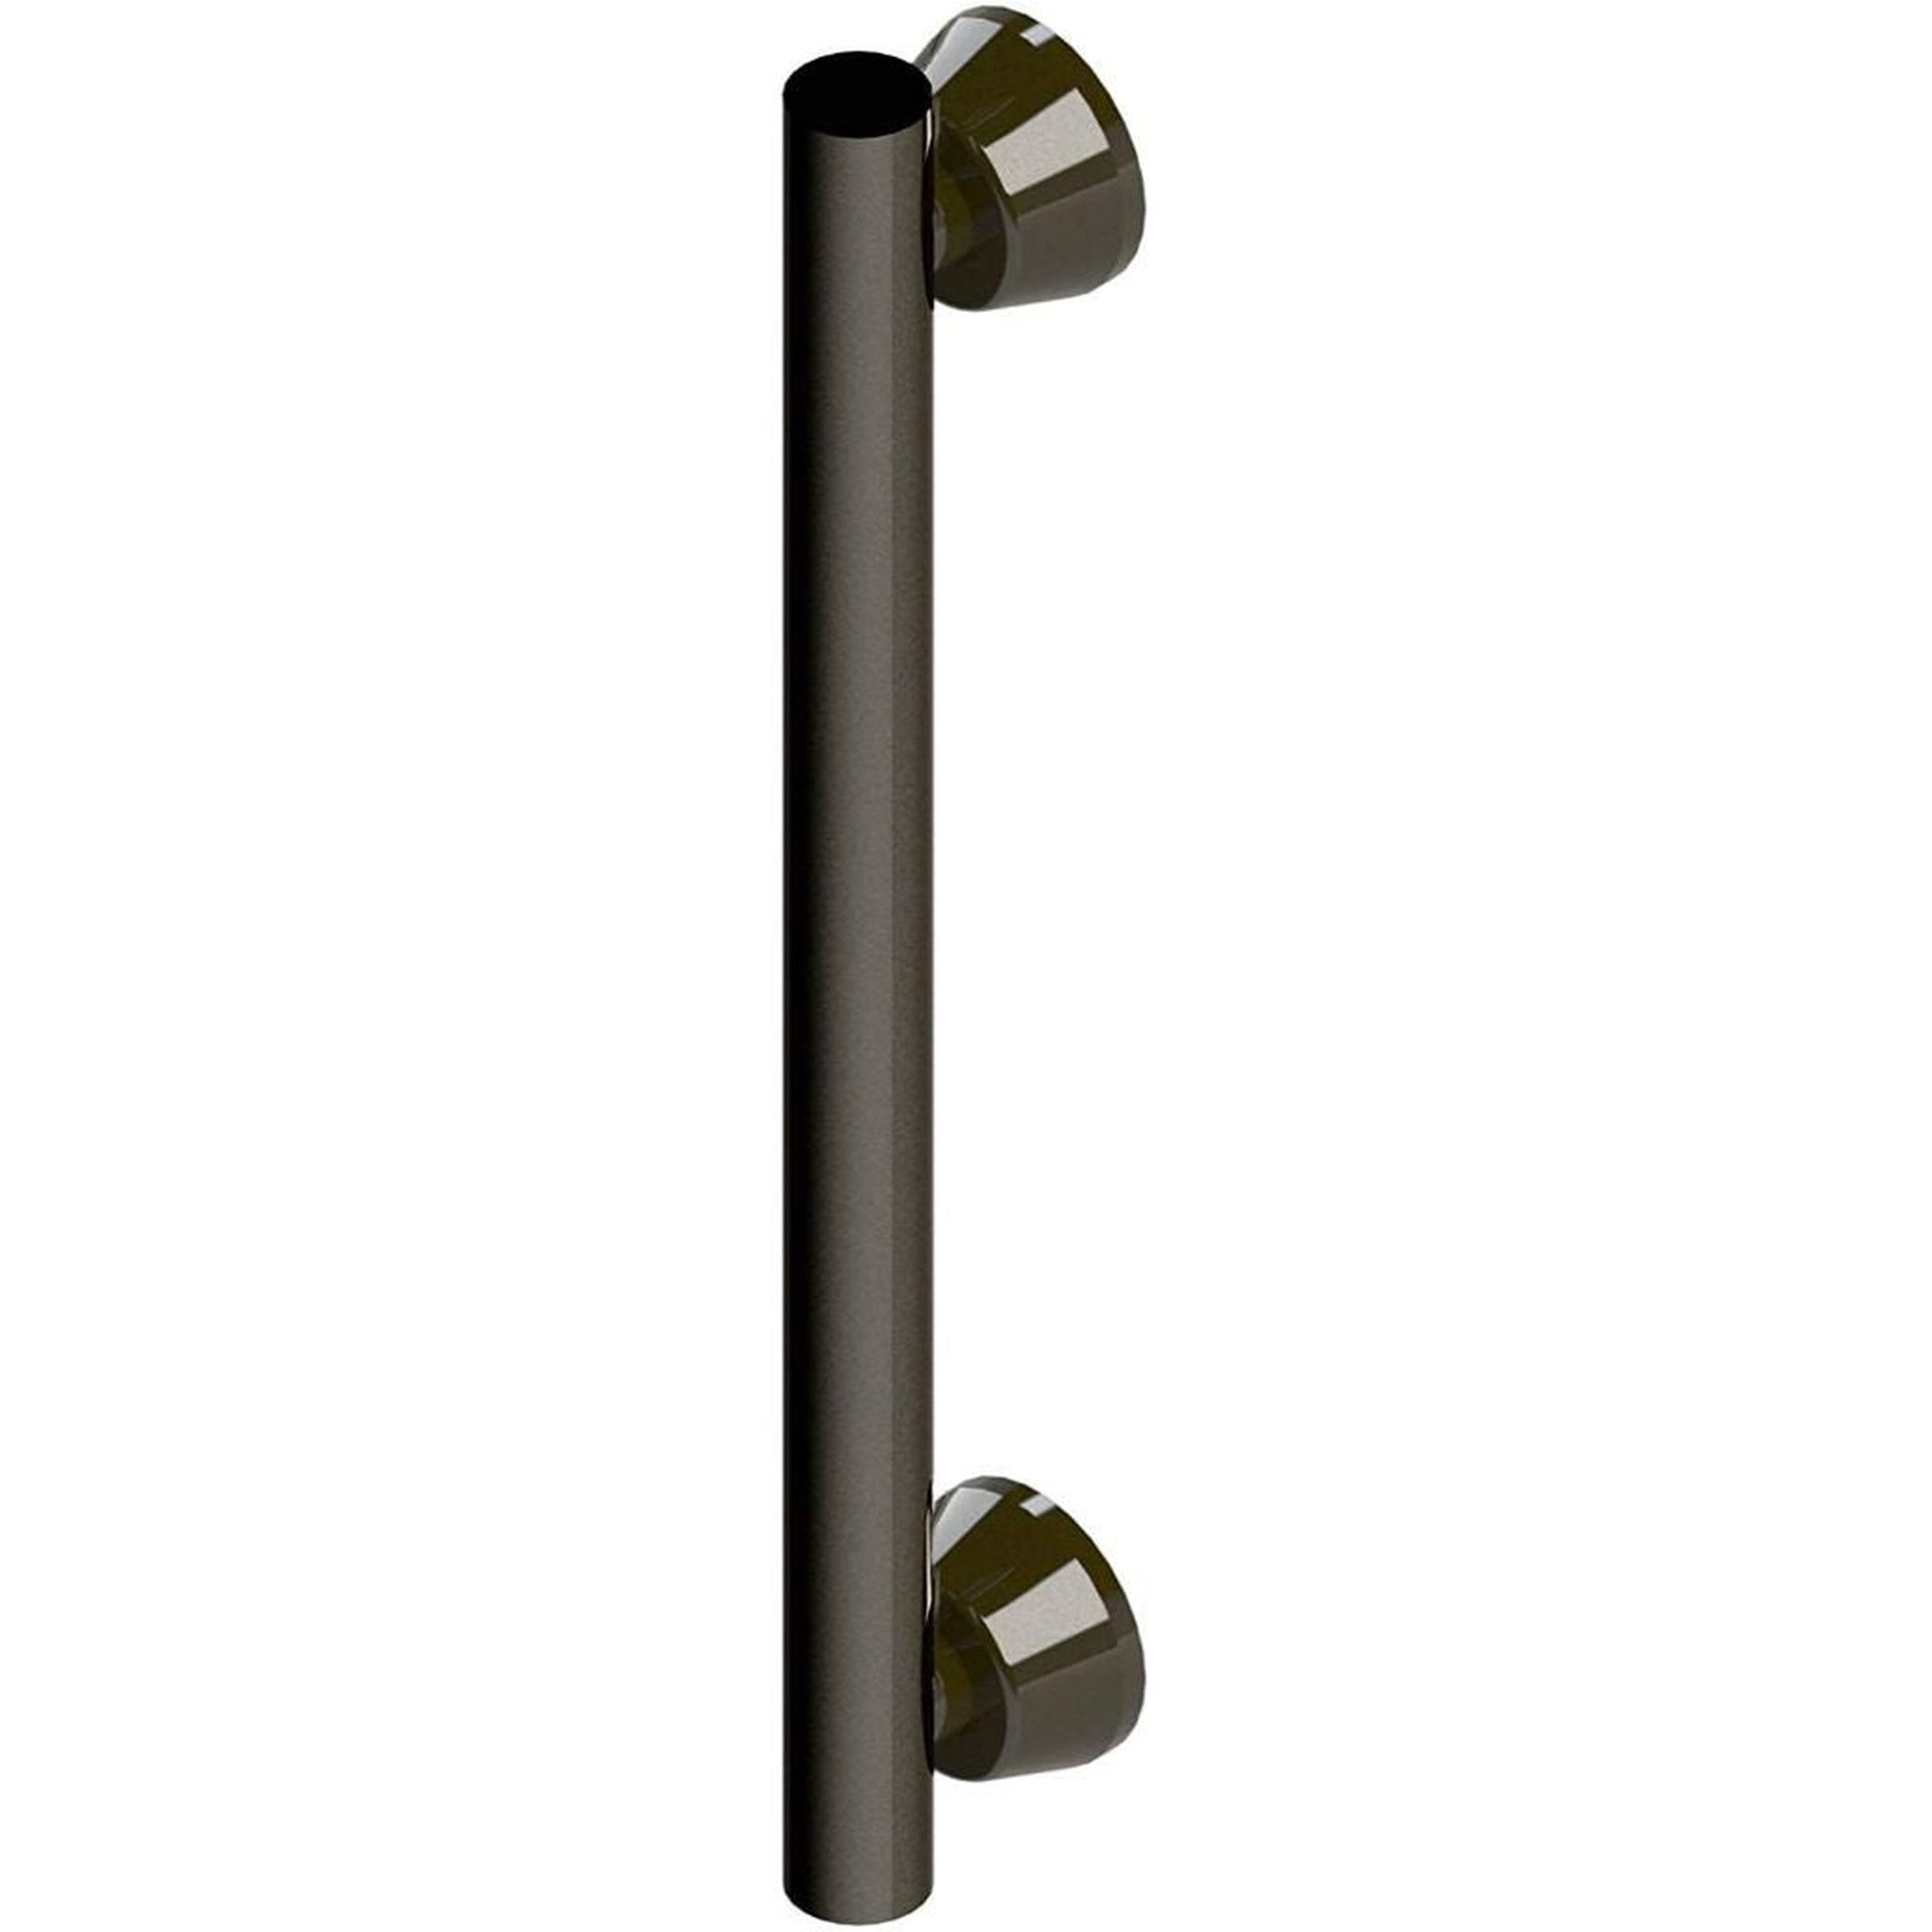 Invisia 12" Oil Rubbed Bronze Wall-Mounted Linear Bar With Integrated Grab Bar